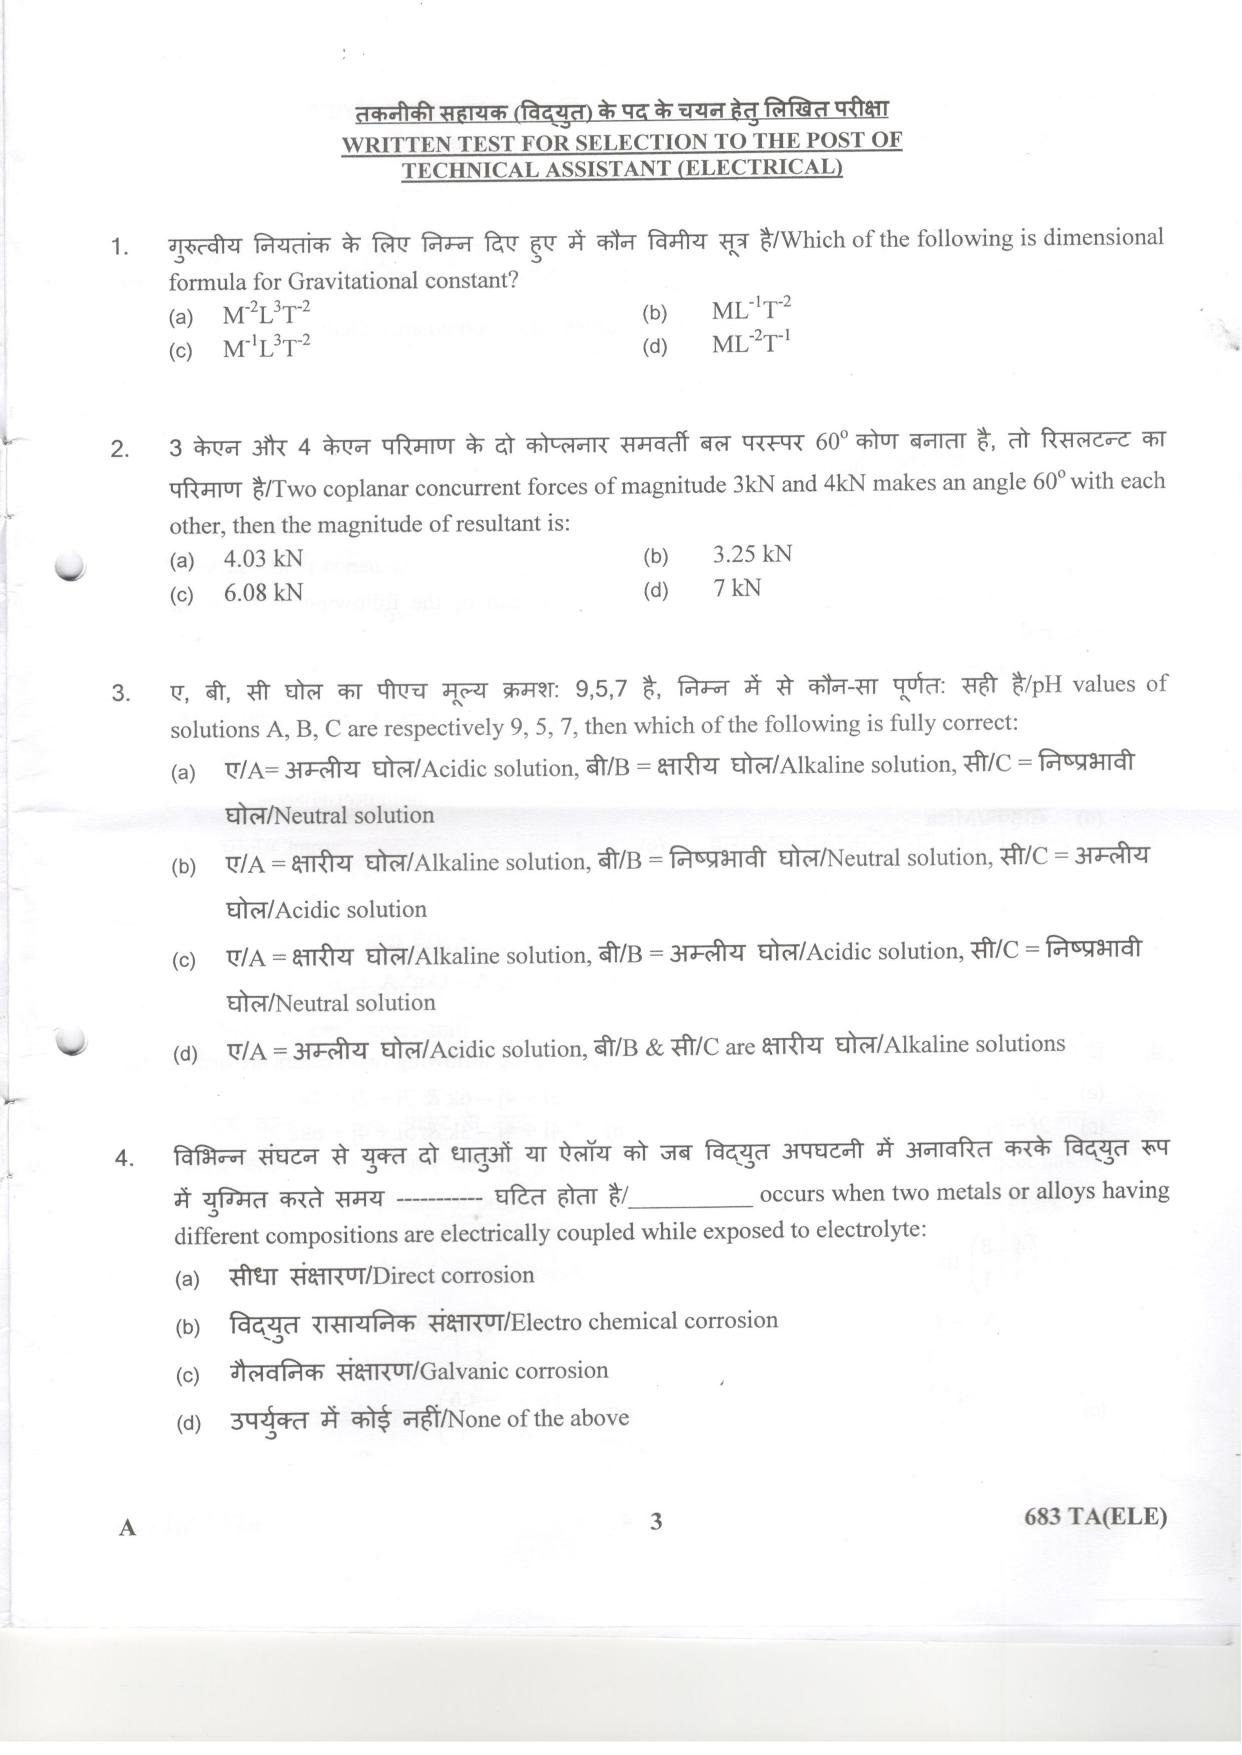 LPSC Technical Assistant (Electrical) 2018 Question Paper - Page 3